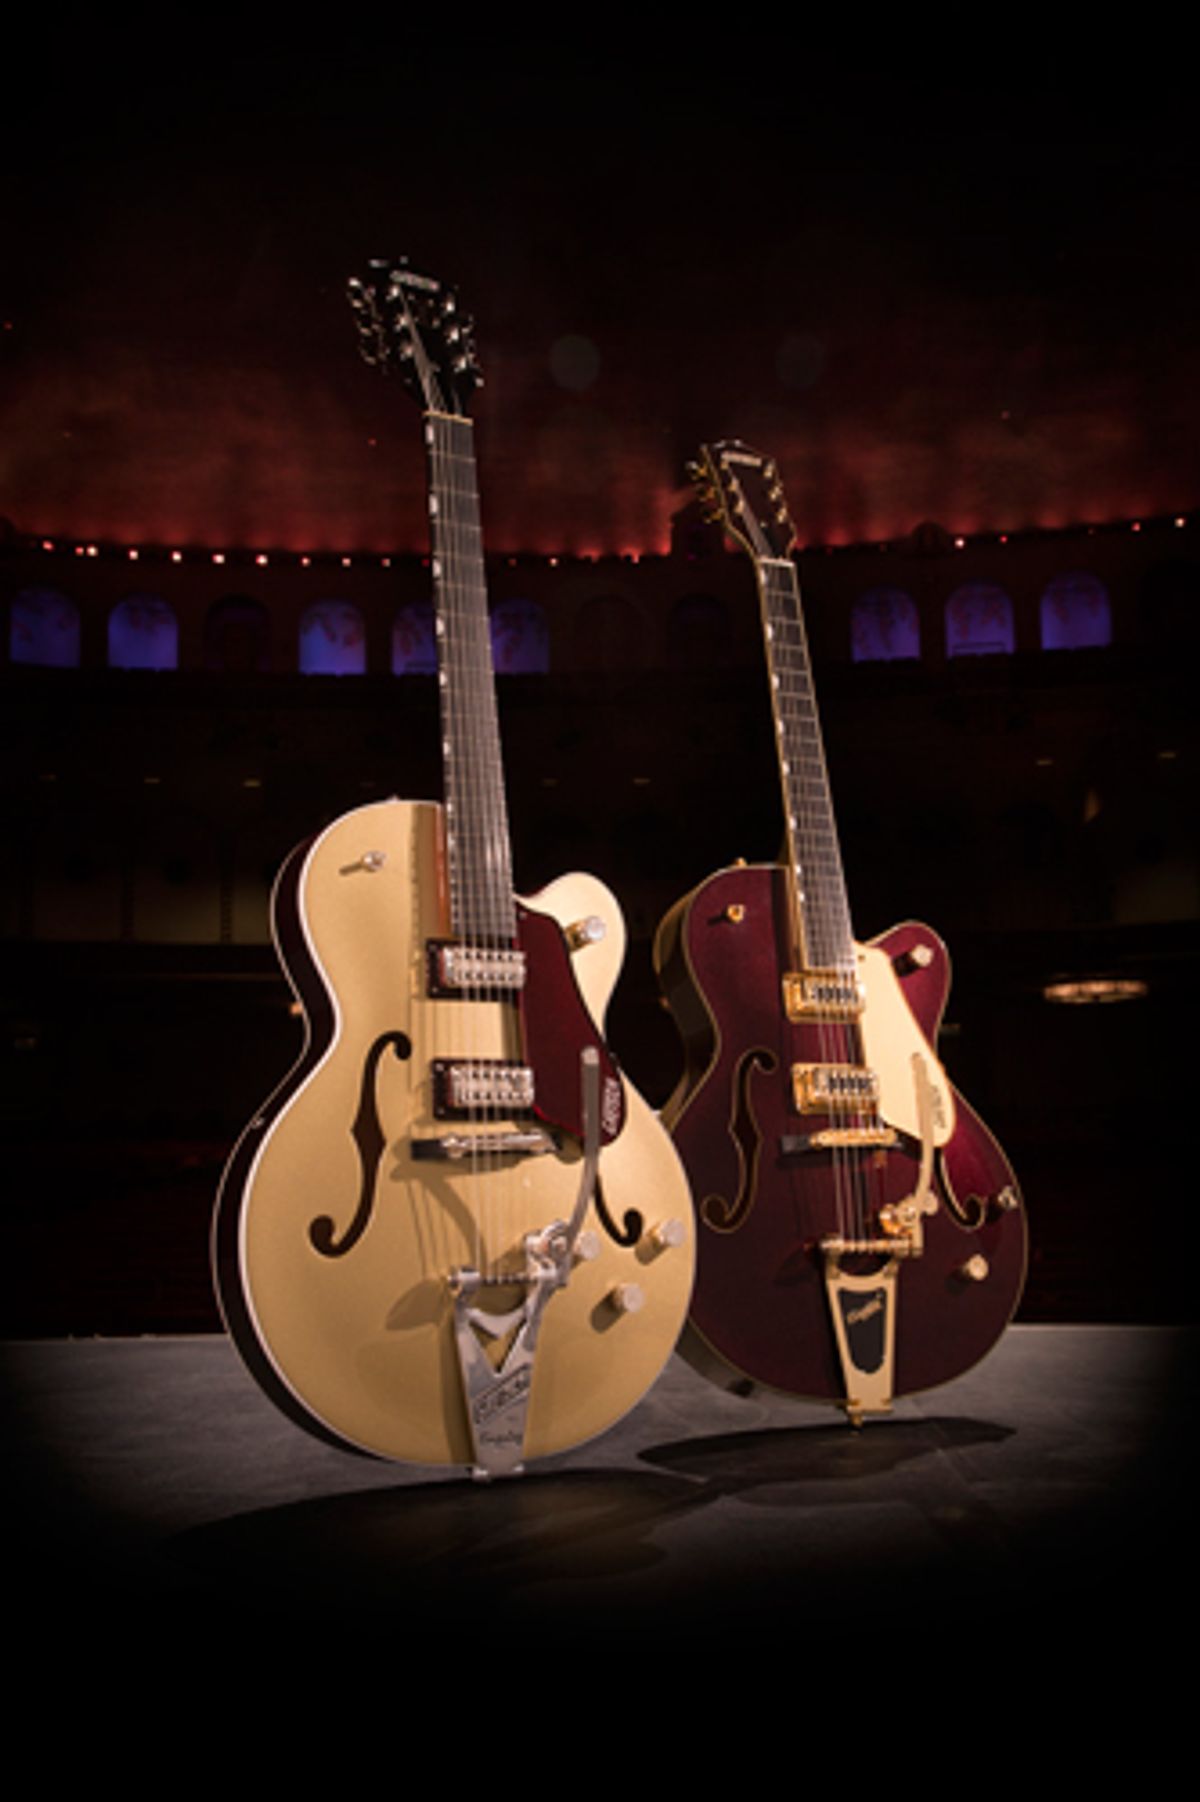 Gretsch Celebrates 135th Anniversary with Two New Limited-Edition Models